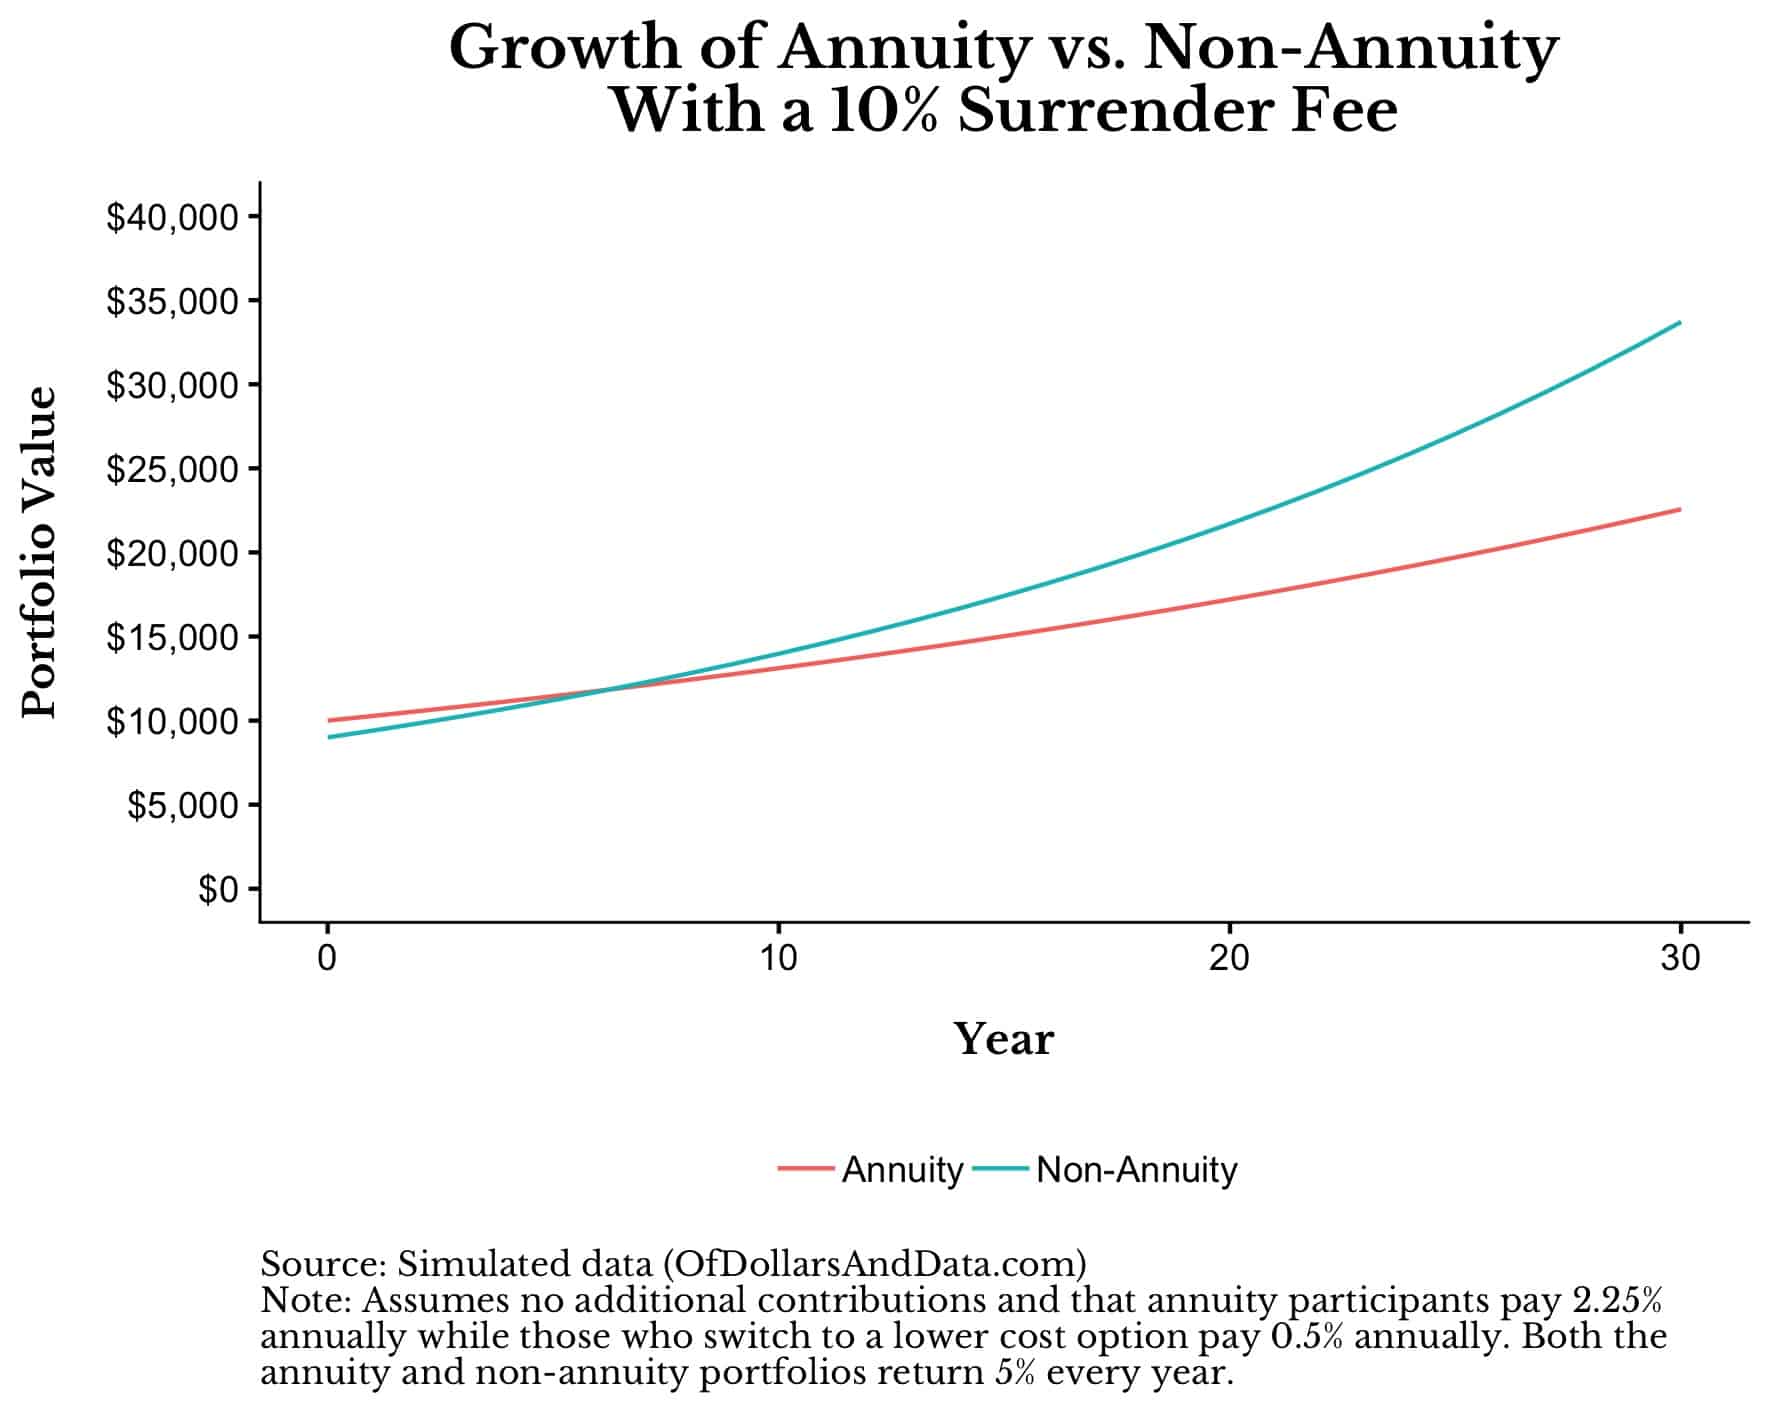 Growth of annuity vs. non-annuity with 10% surrender fee